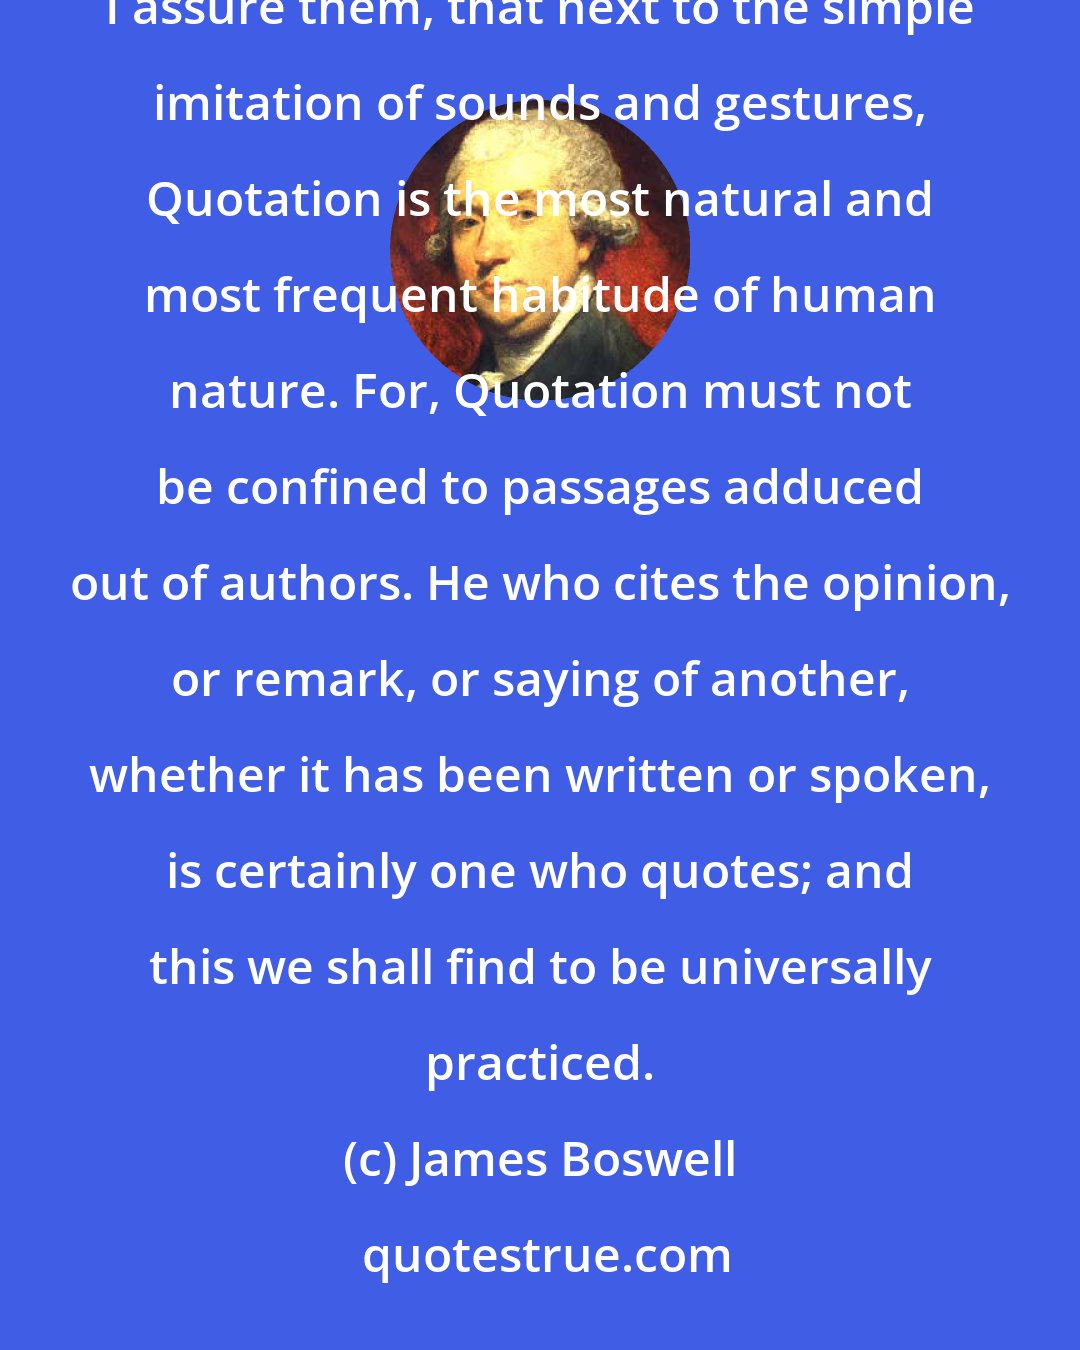 James Boswell: My readers, who may at first be apt to consider Quotation as downright pedantry, will be surprised when I assure them, that next to the simple imitation of sounds and gestures, Quotation is the most natural and most frequent habitude of human nature. For, Quotation must not be confined to passages adduced out of authors. He who cites the opinion, or remark, or saying of another, whether it has been written or spoken, is certainly one who quotes; and this we shall find to be universally practiced.